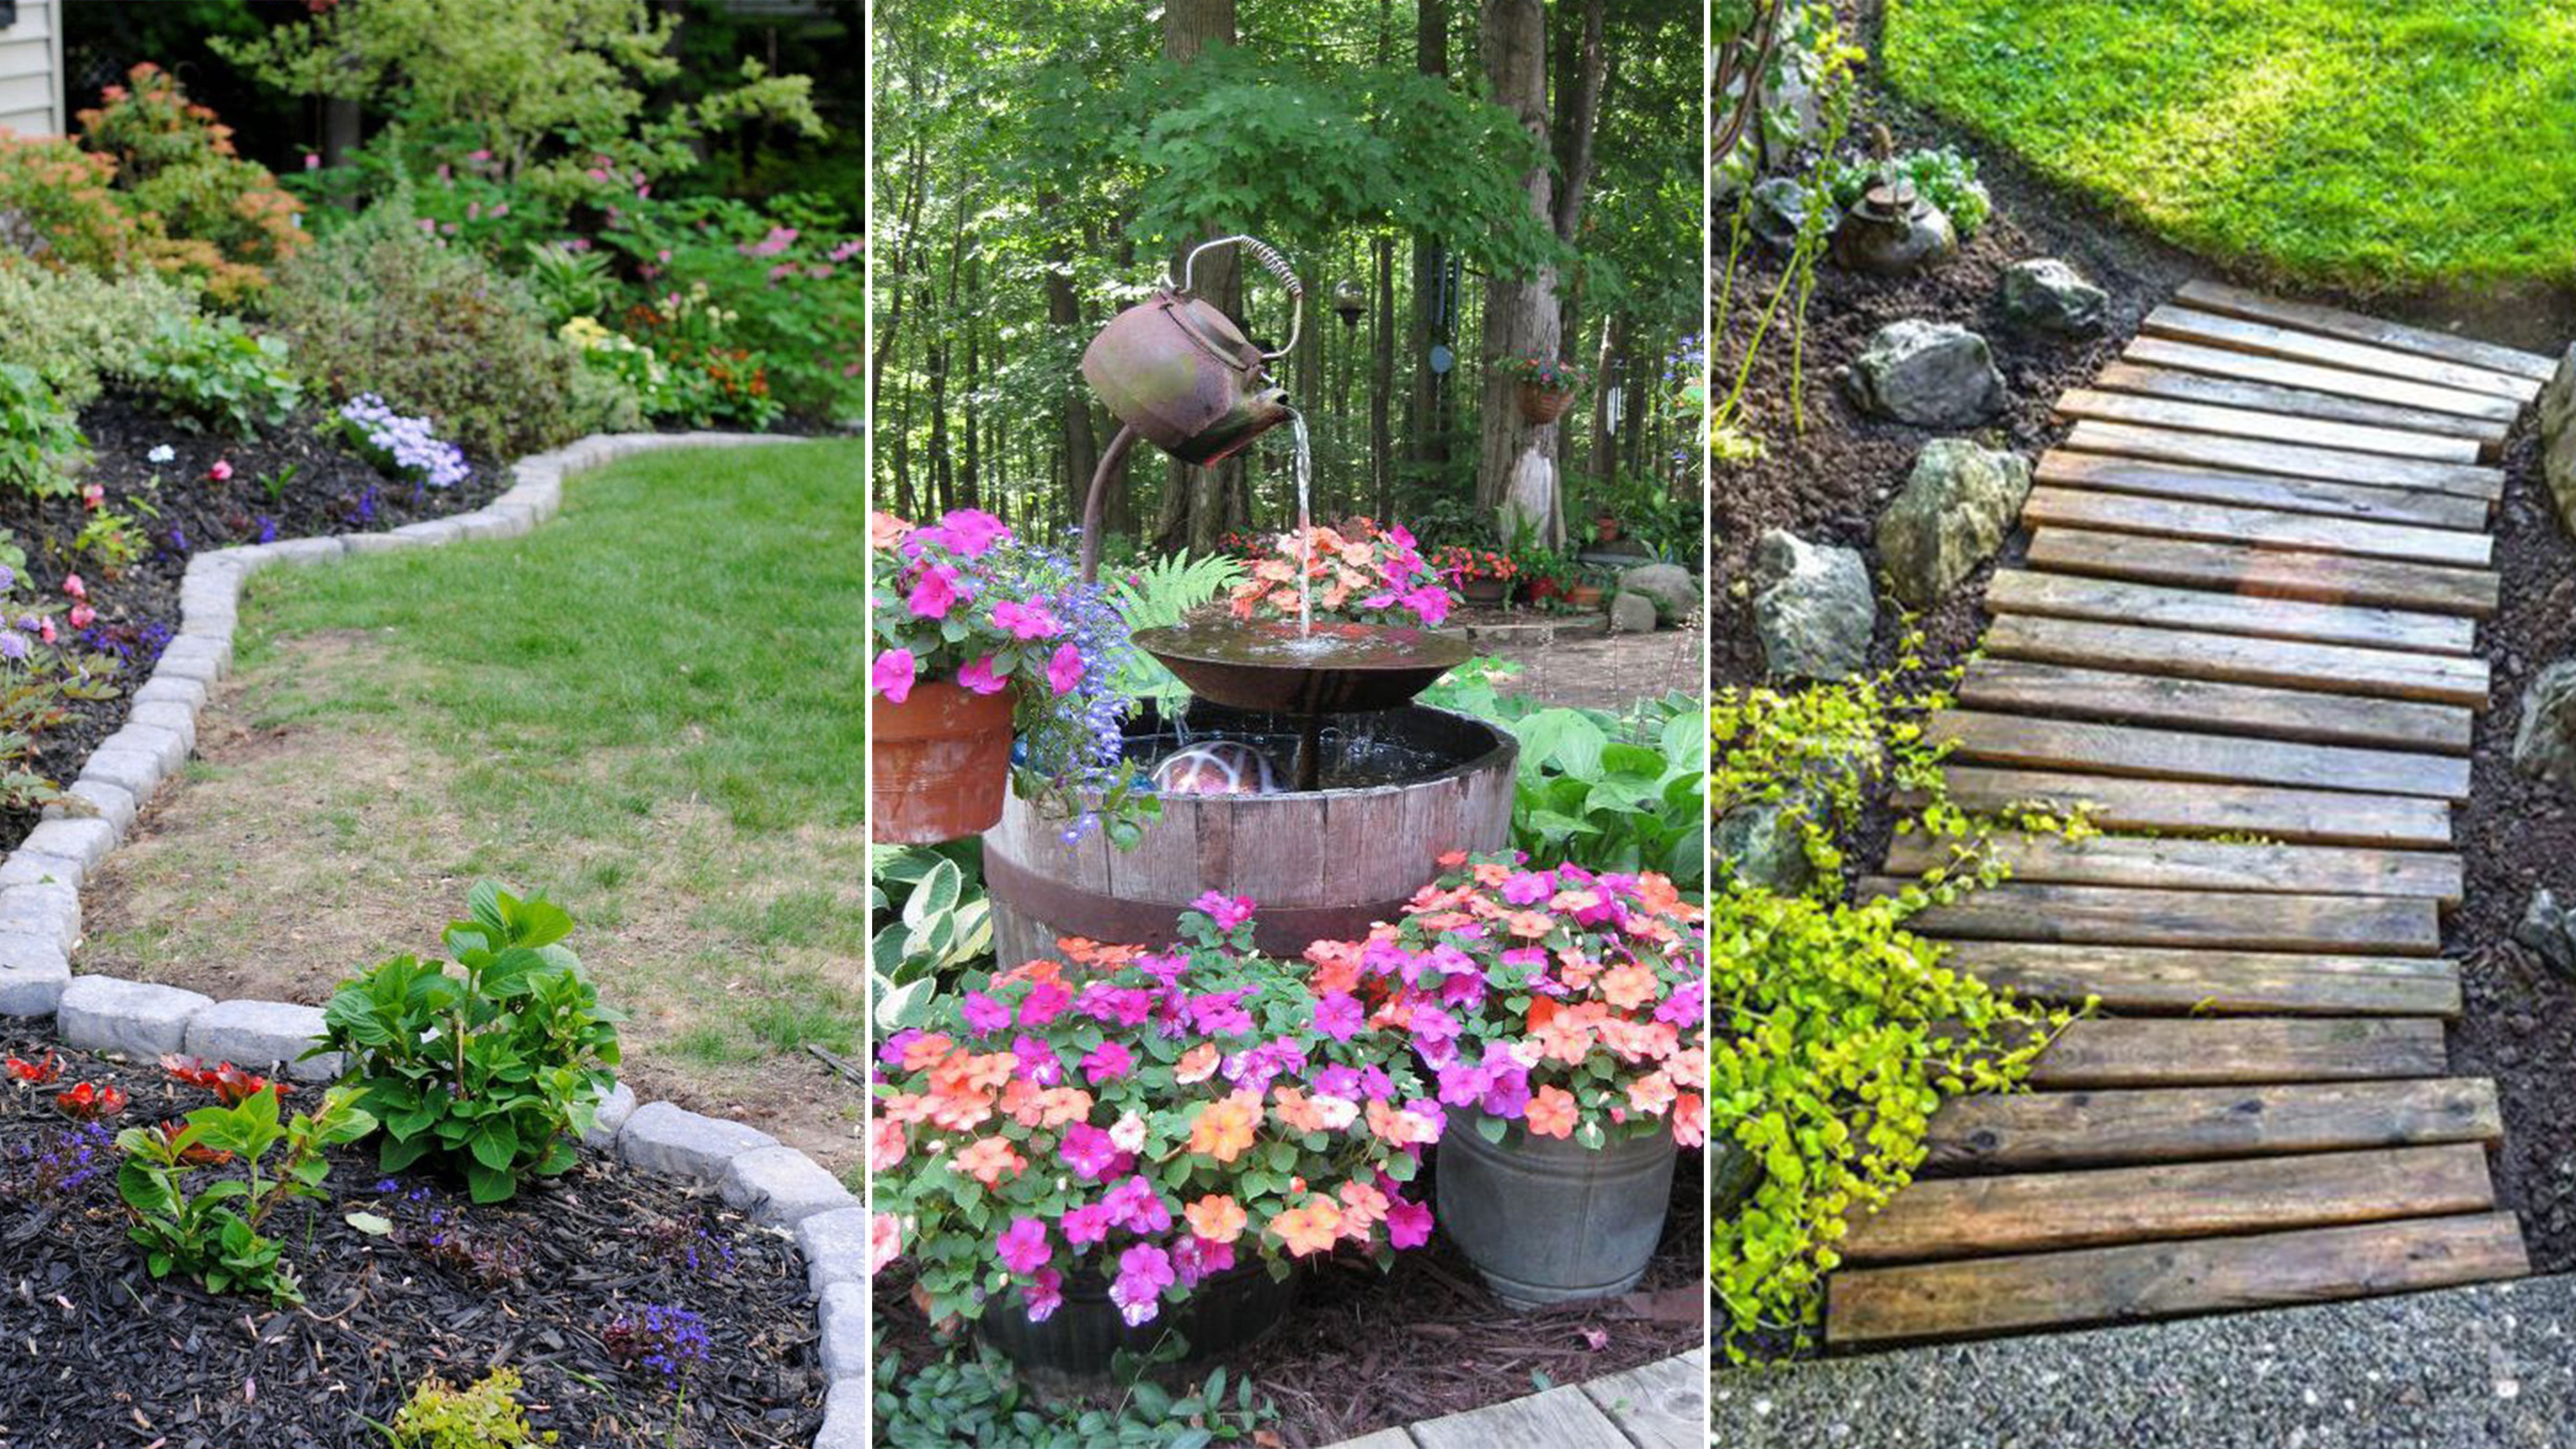 14 inexpensive landscaping ideas - budget-friendly landscaping tips for the front yard MKWDQJF